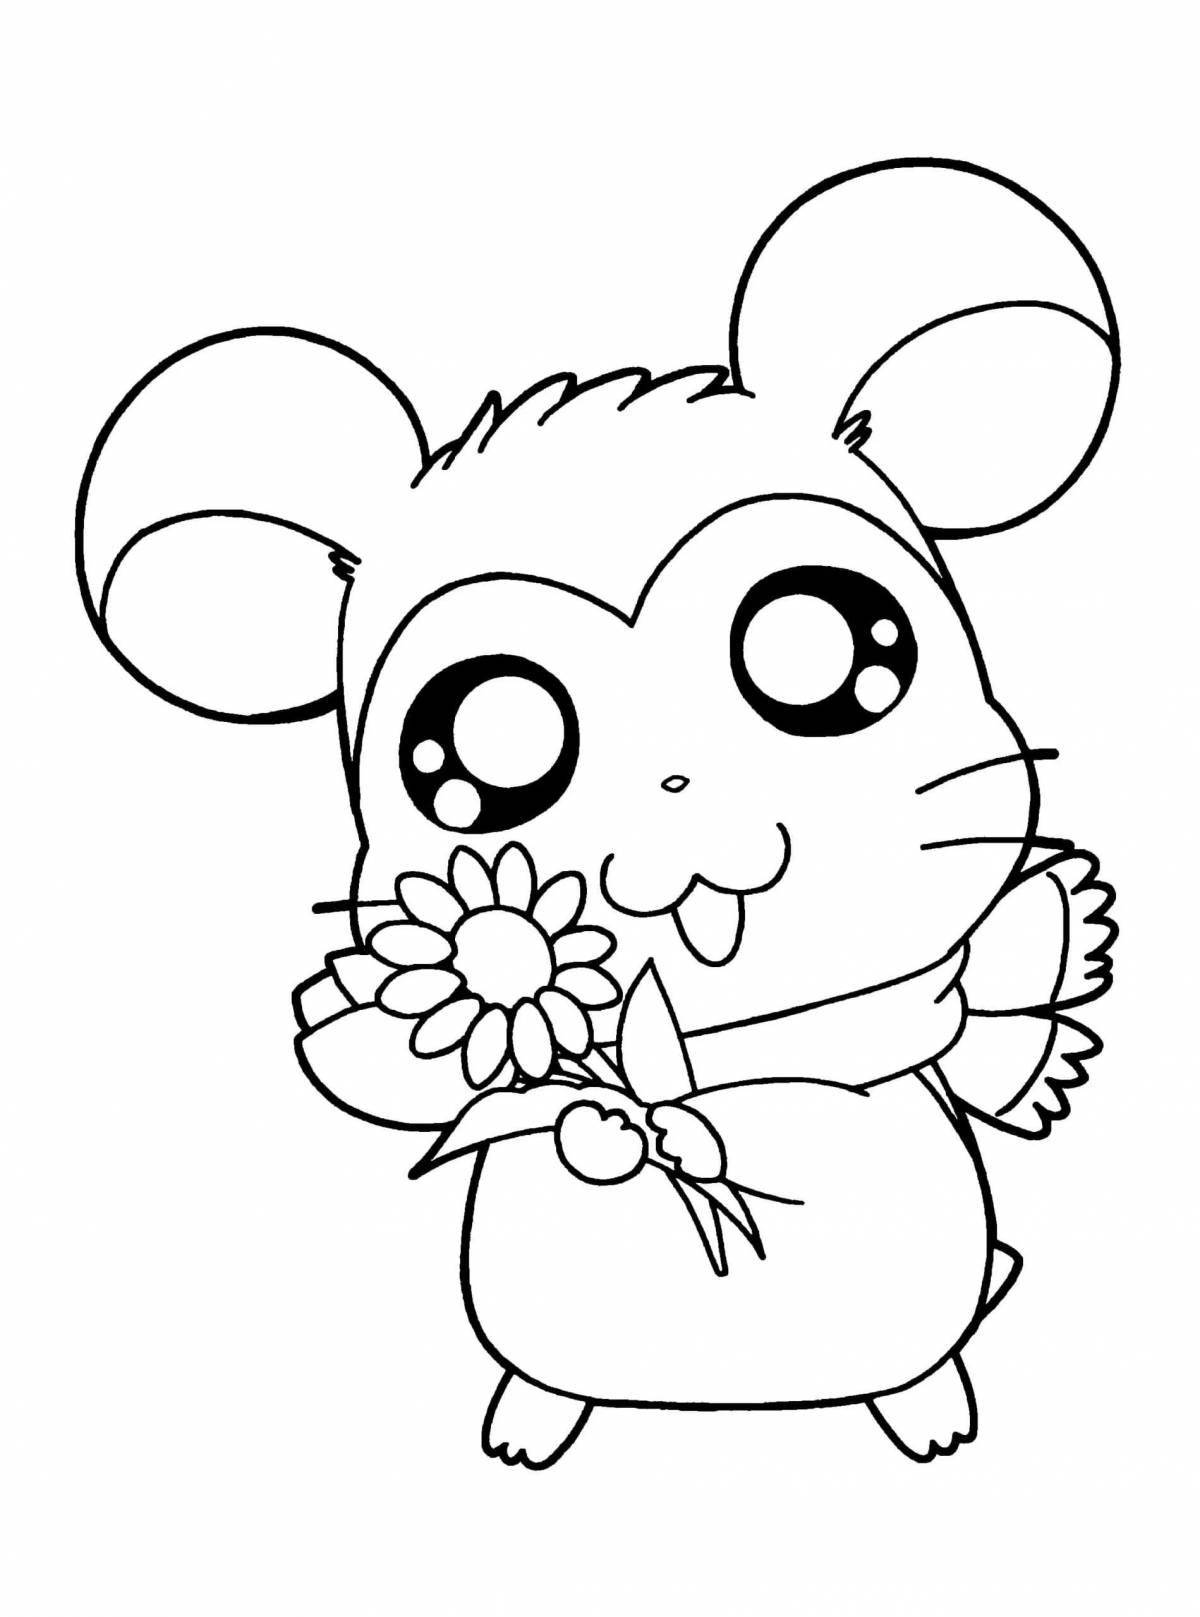 Luminous animal coloring pages for girls